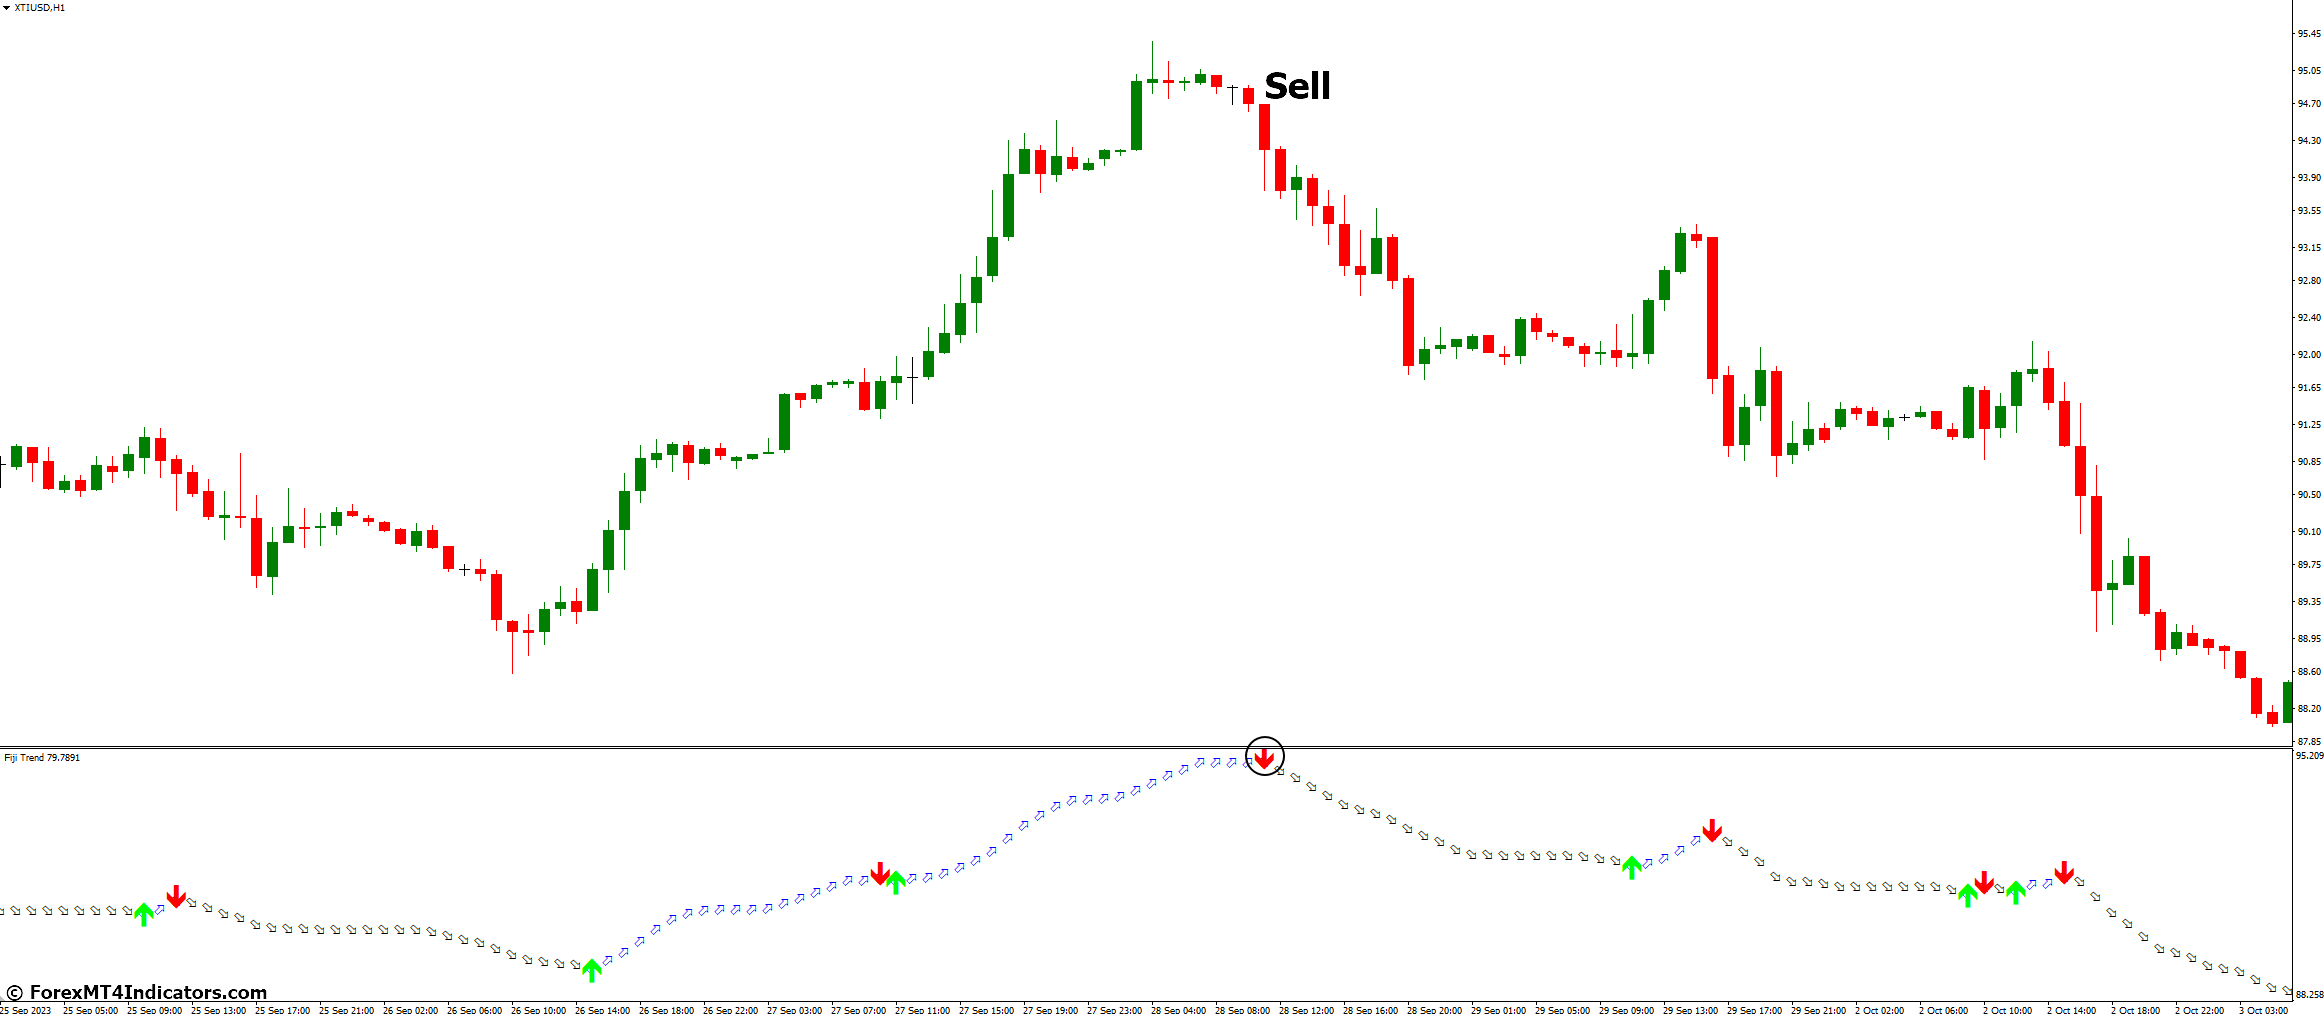 How to Trade with Fiji Trend Indicator - Sell Entry